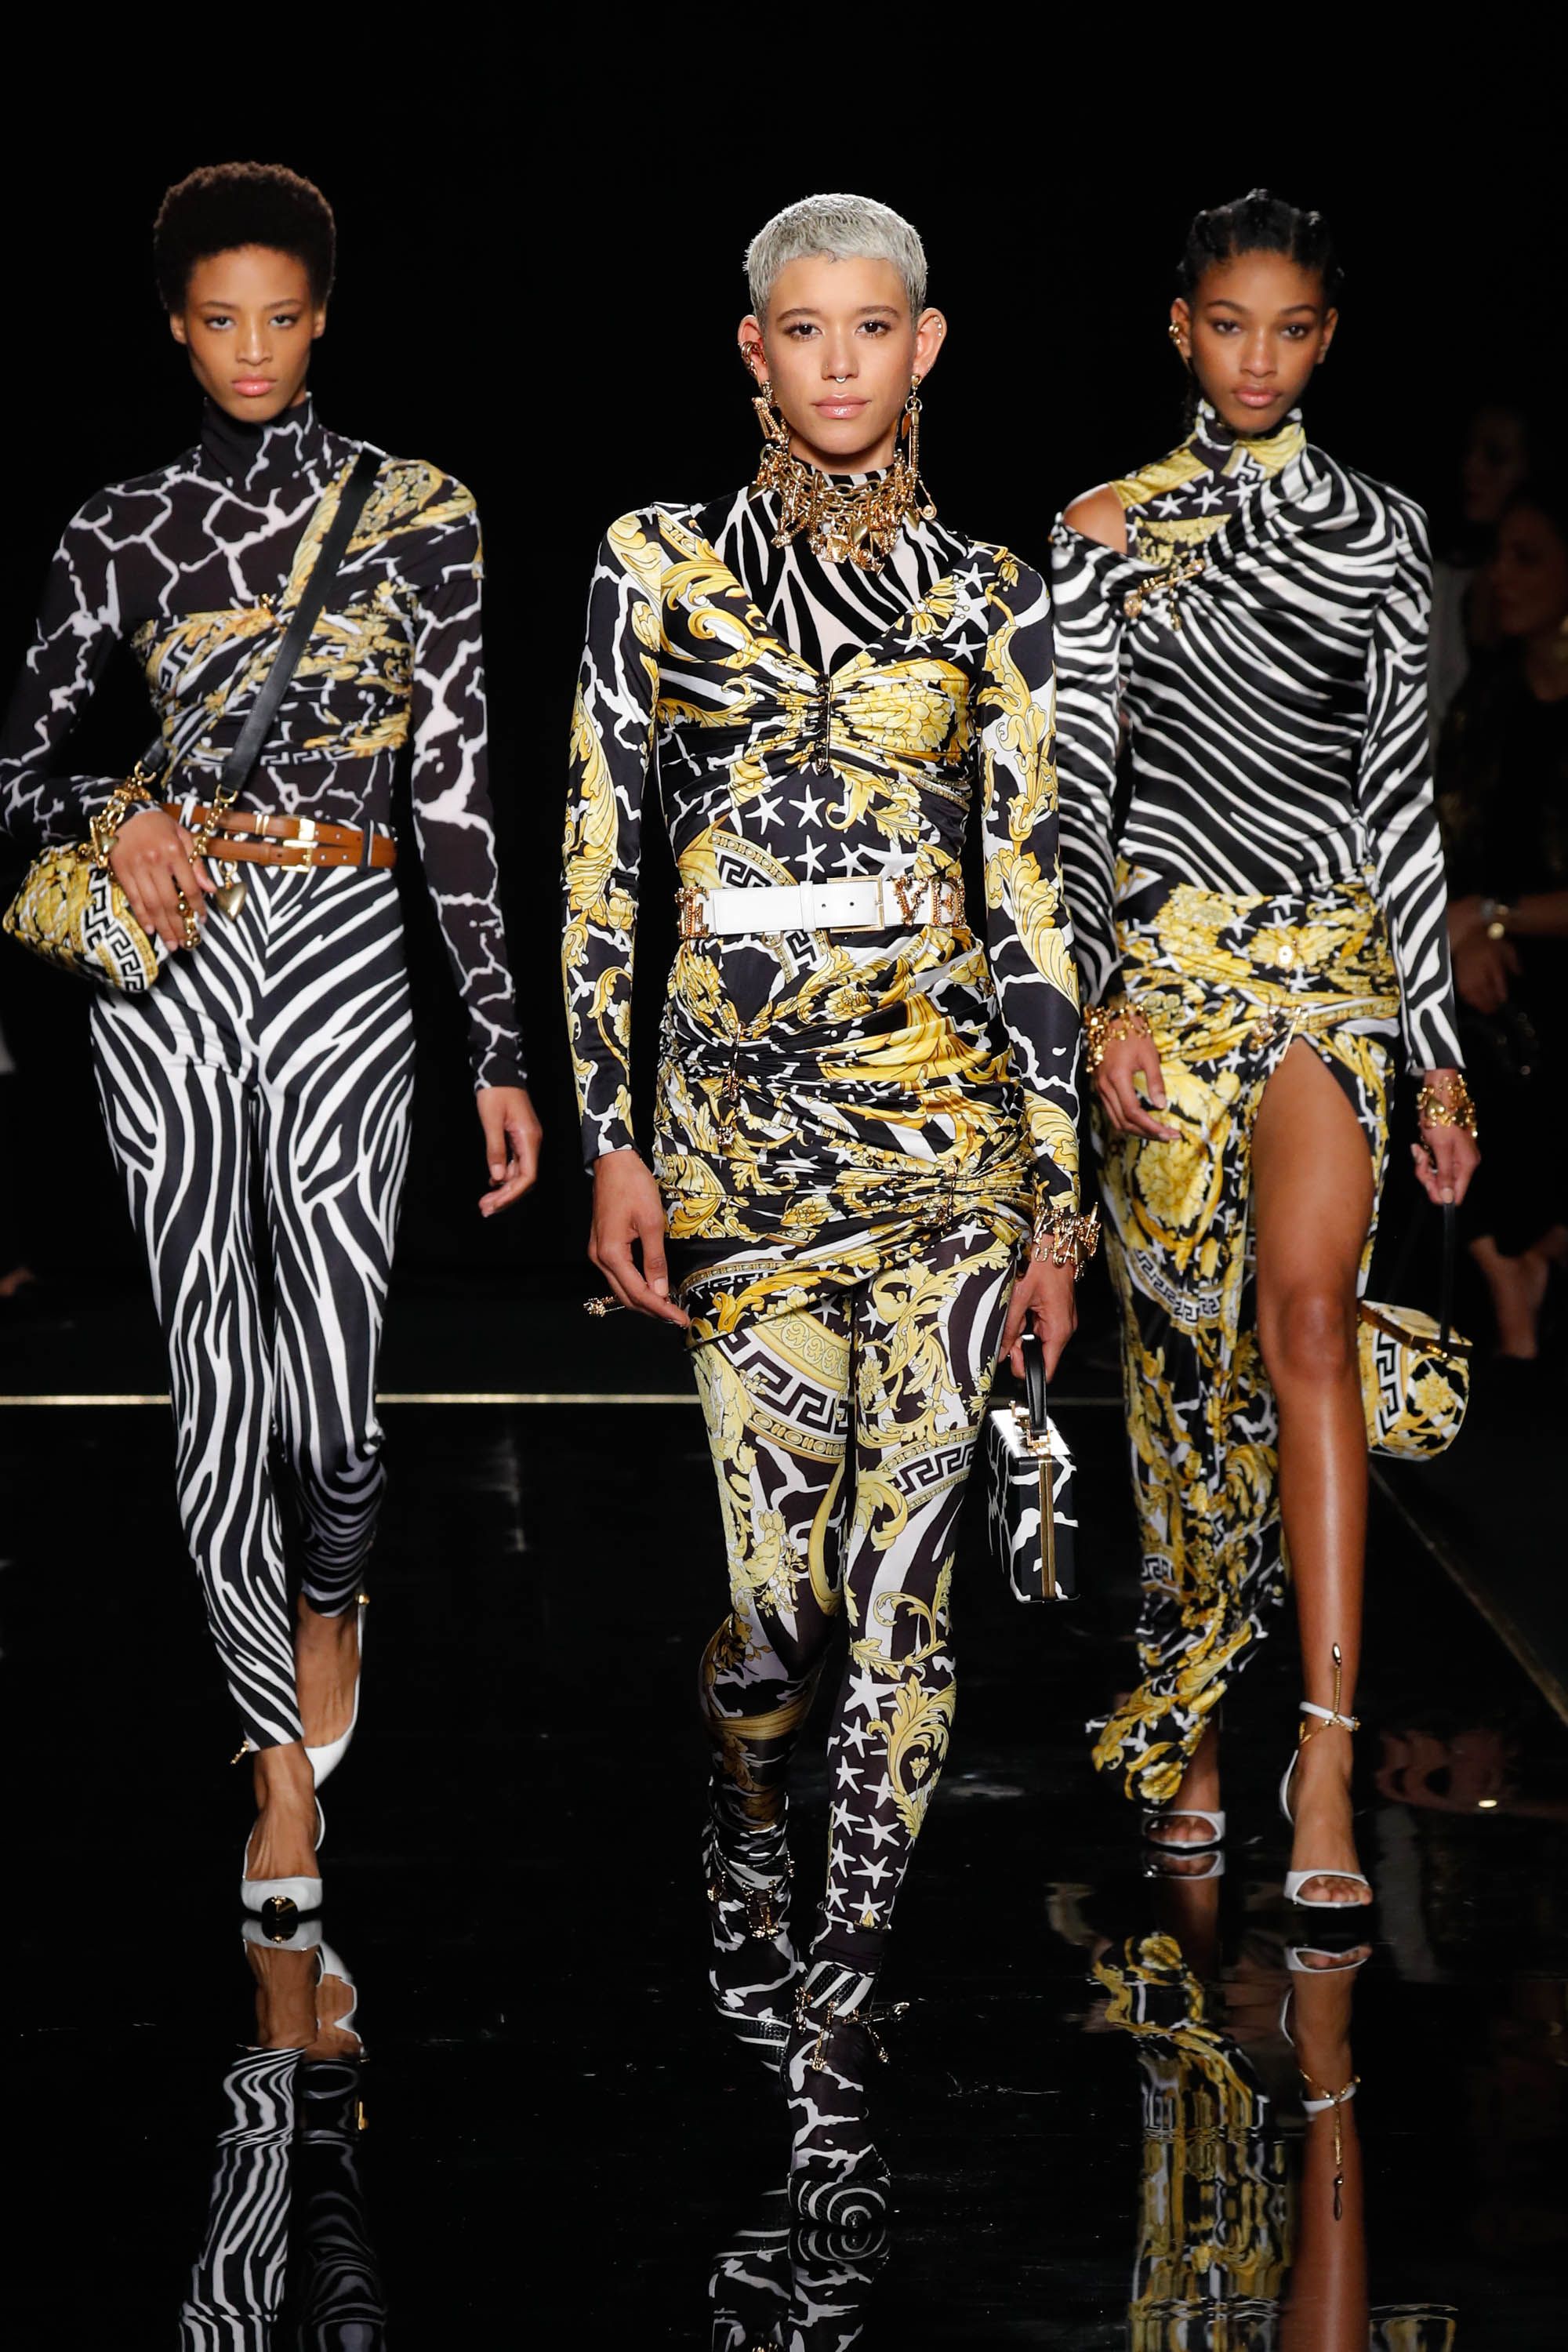 Versace Catwalk book features more than 40 years of looks